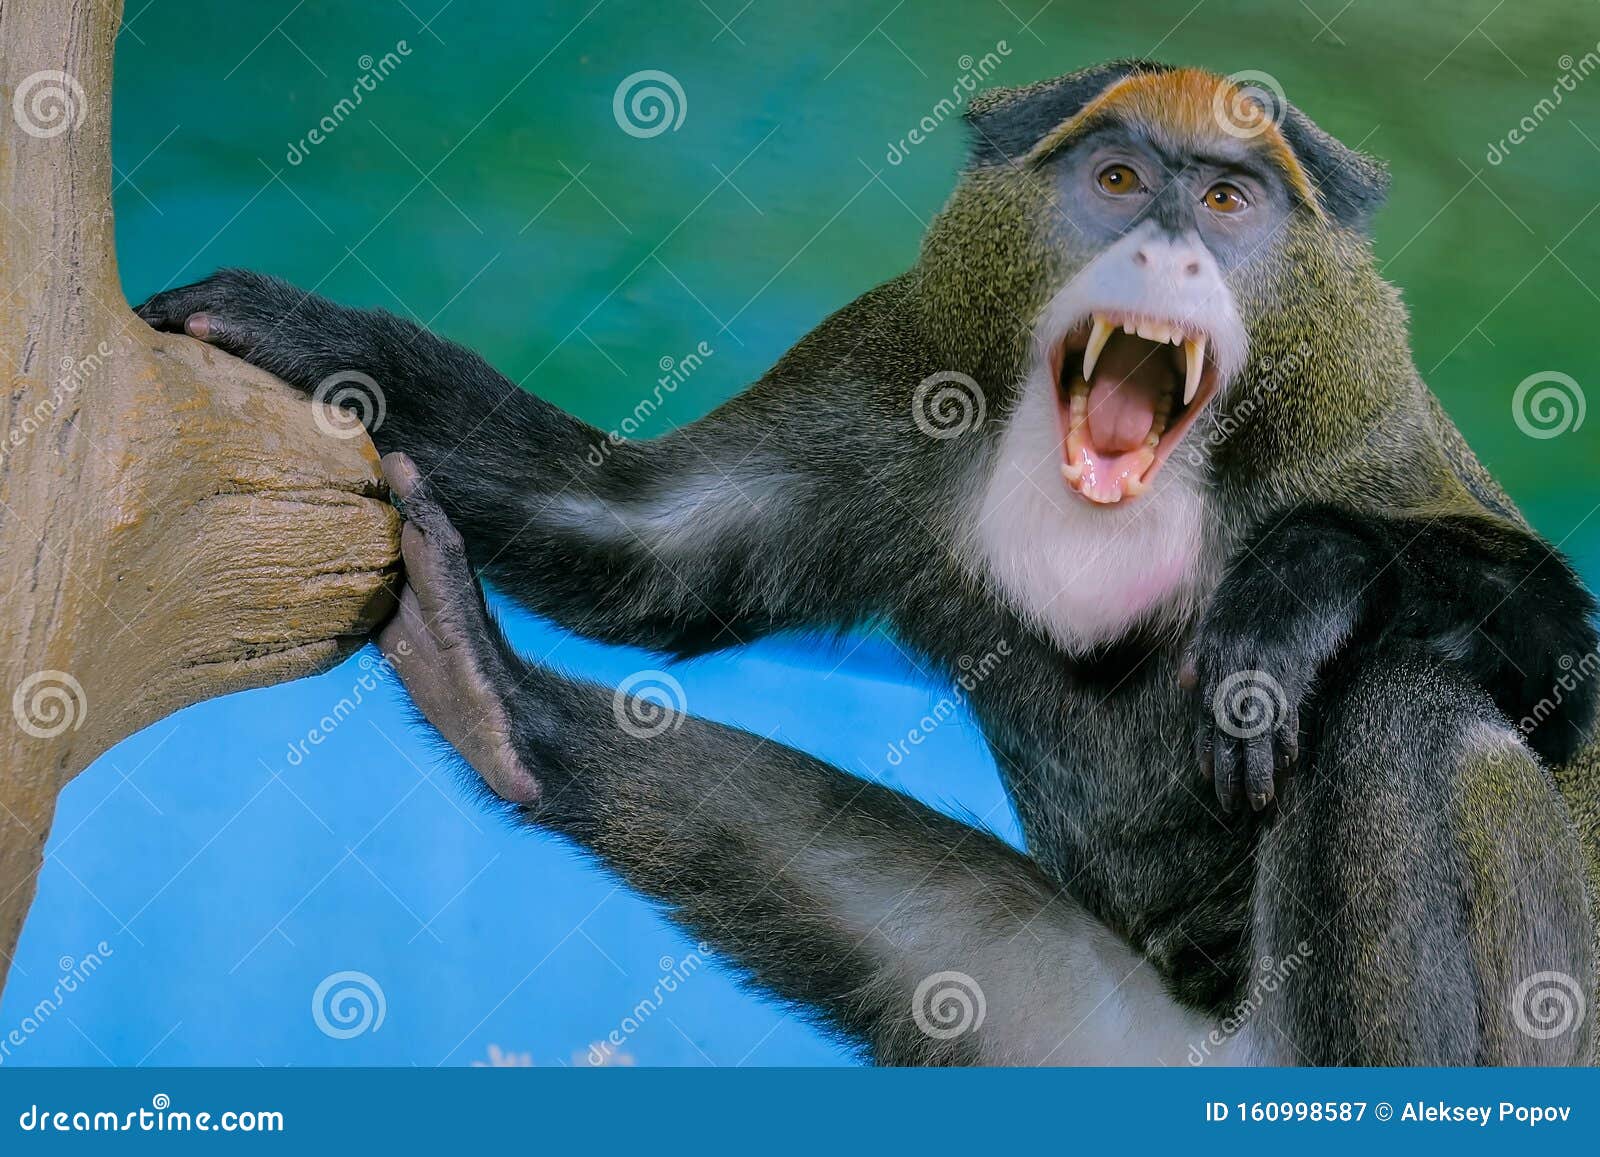 Funny Monkey Sitting in the Tree and Yawning Stock Image - Image ...